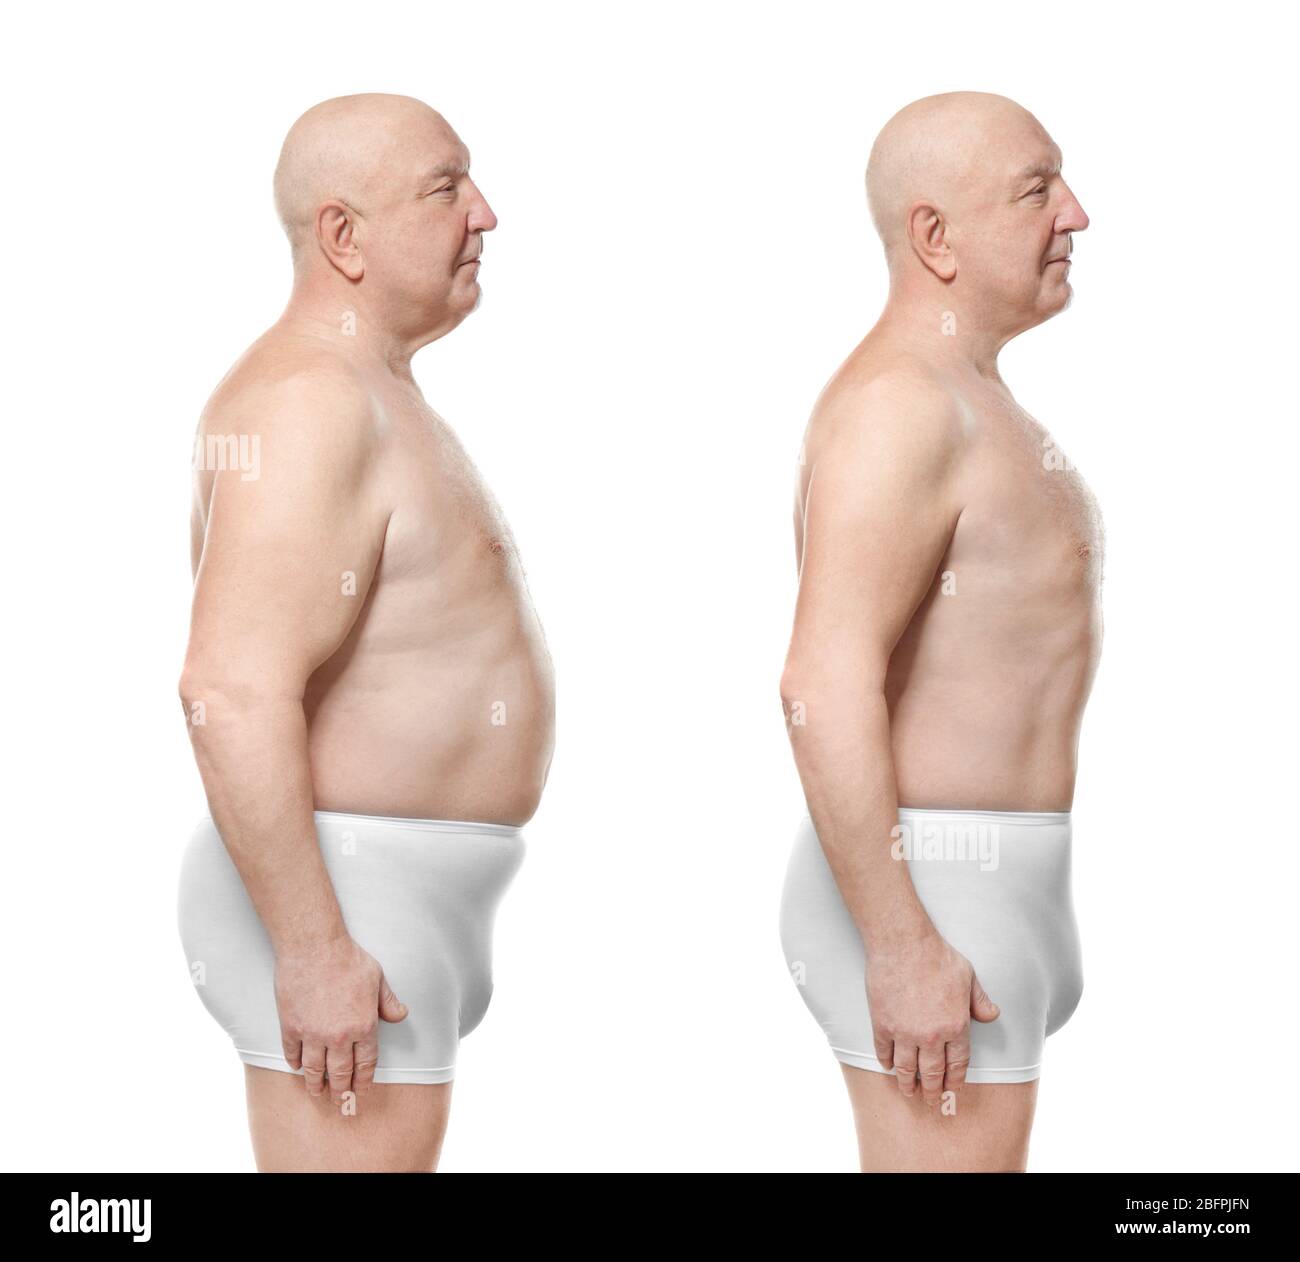 Weight Loss Before After Man Images – Browse 1,665 Stock Photos